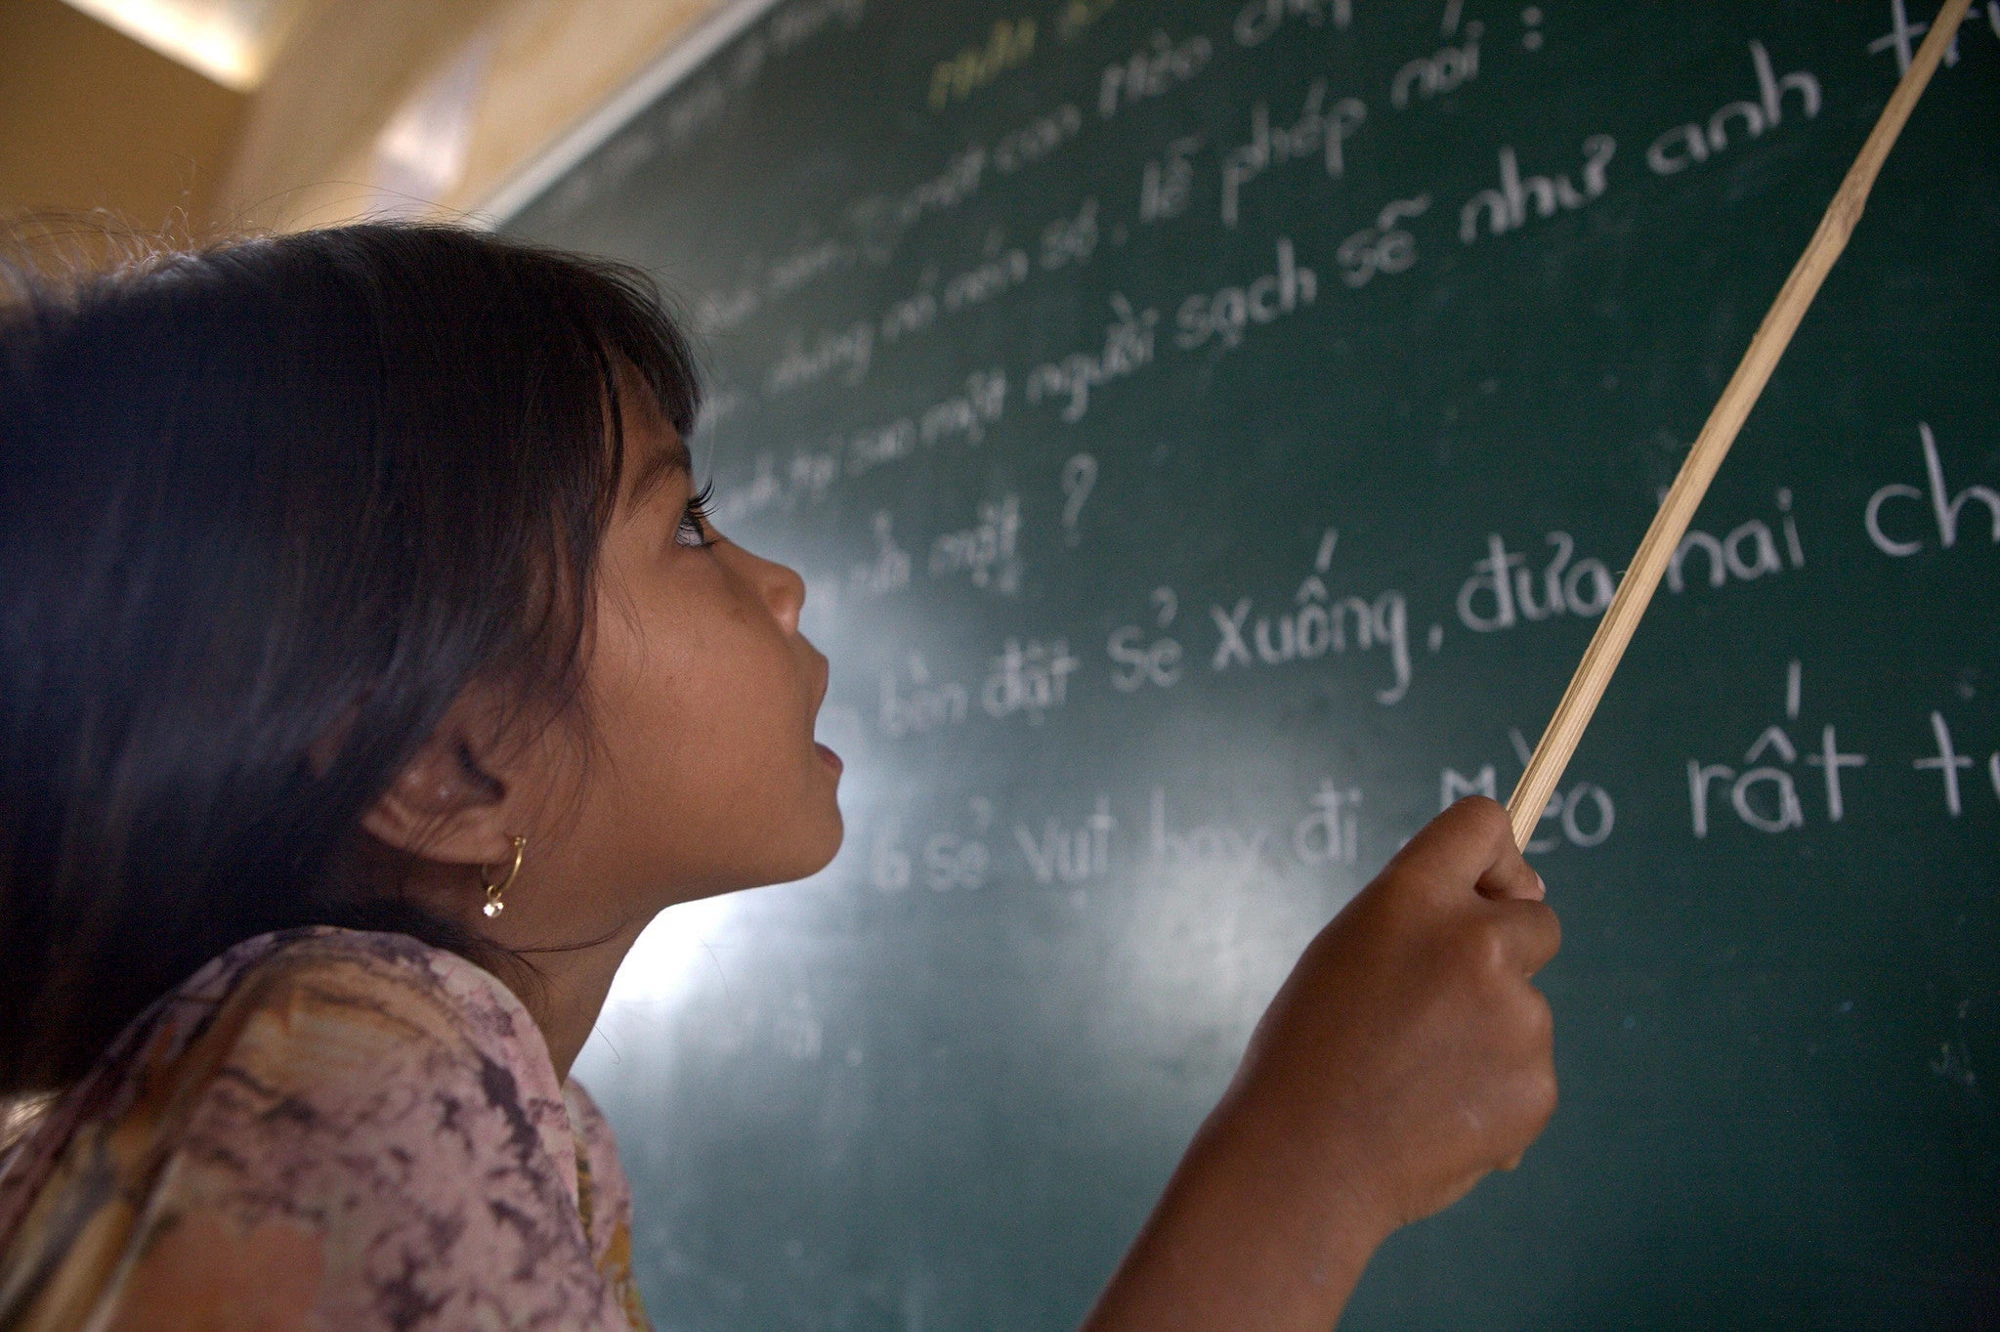 A student of Khmer descent learns Kinh language (the official Vietnamese language) at the Lac Hoa Primary School in Soc Trang province. The report "Vietnam High Education For All by 2020" finds that gaps in learning still exist, particularly between groups of different income levels and between Kinh, Chinese and ethnic minorities. Soc Trang province, Vietnam